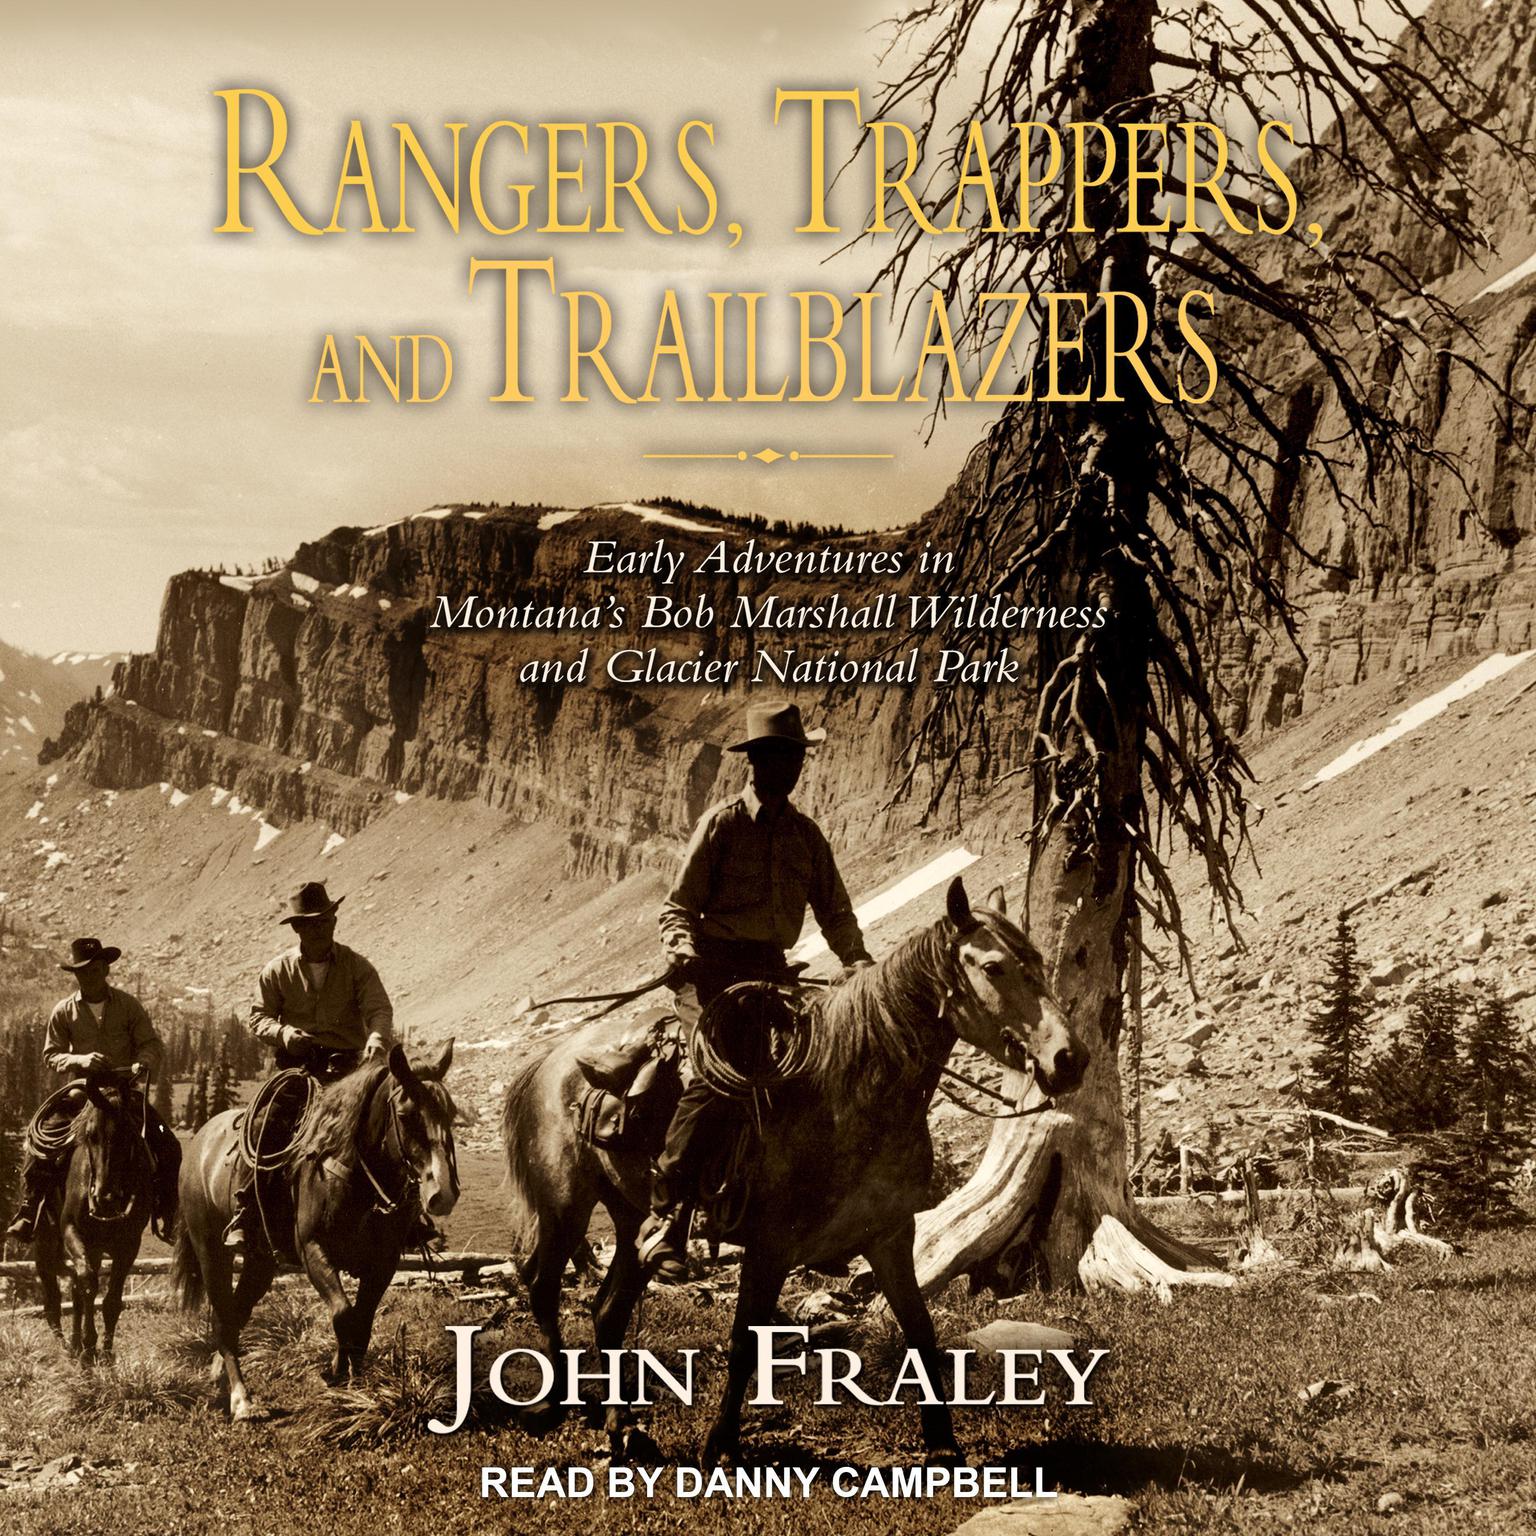 Rangers, Trappers, and Trailblazers: Early Adventures in Montanas Bob Marshall Wilderness and Glacier National Park Audiobook, by John Fraley